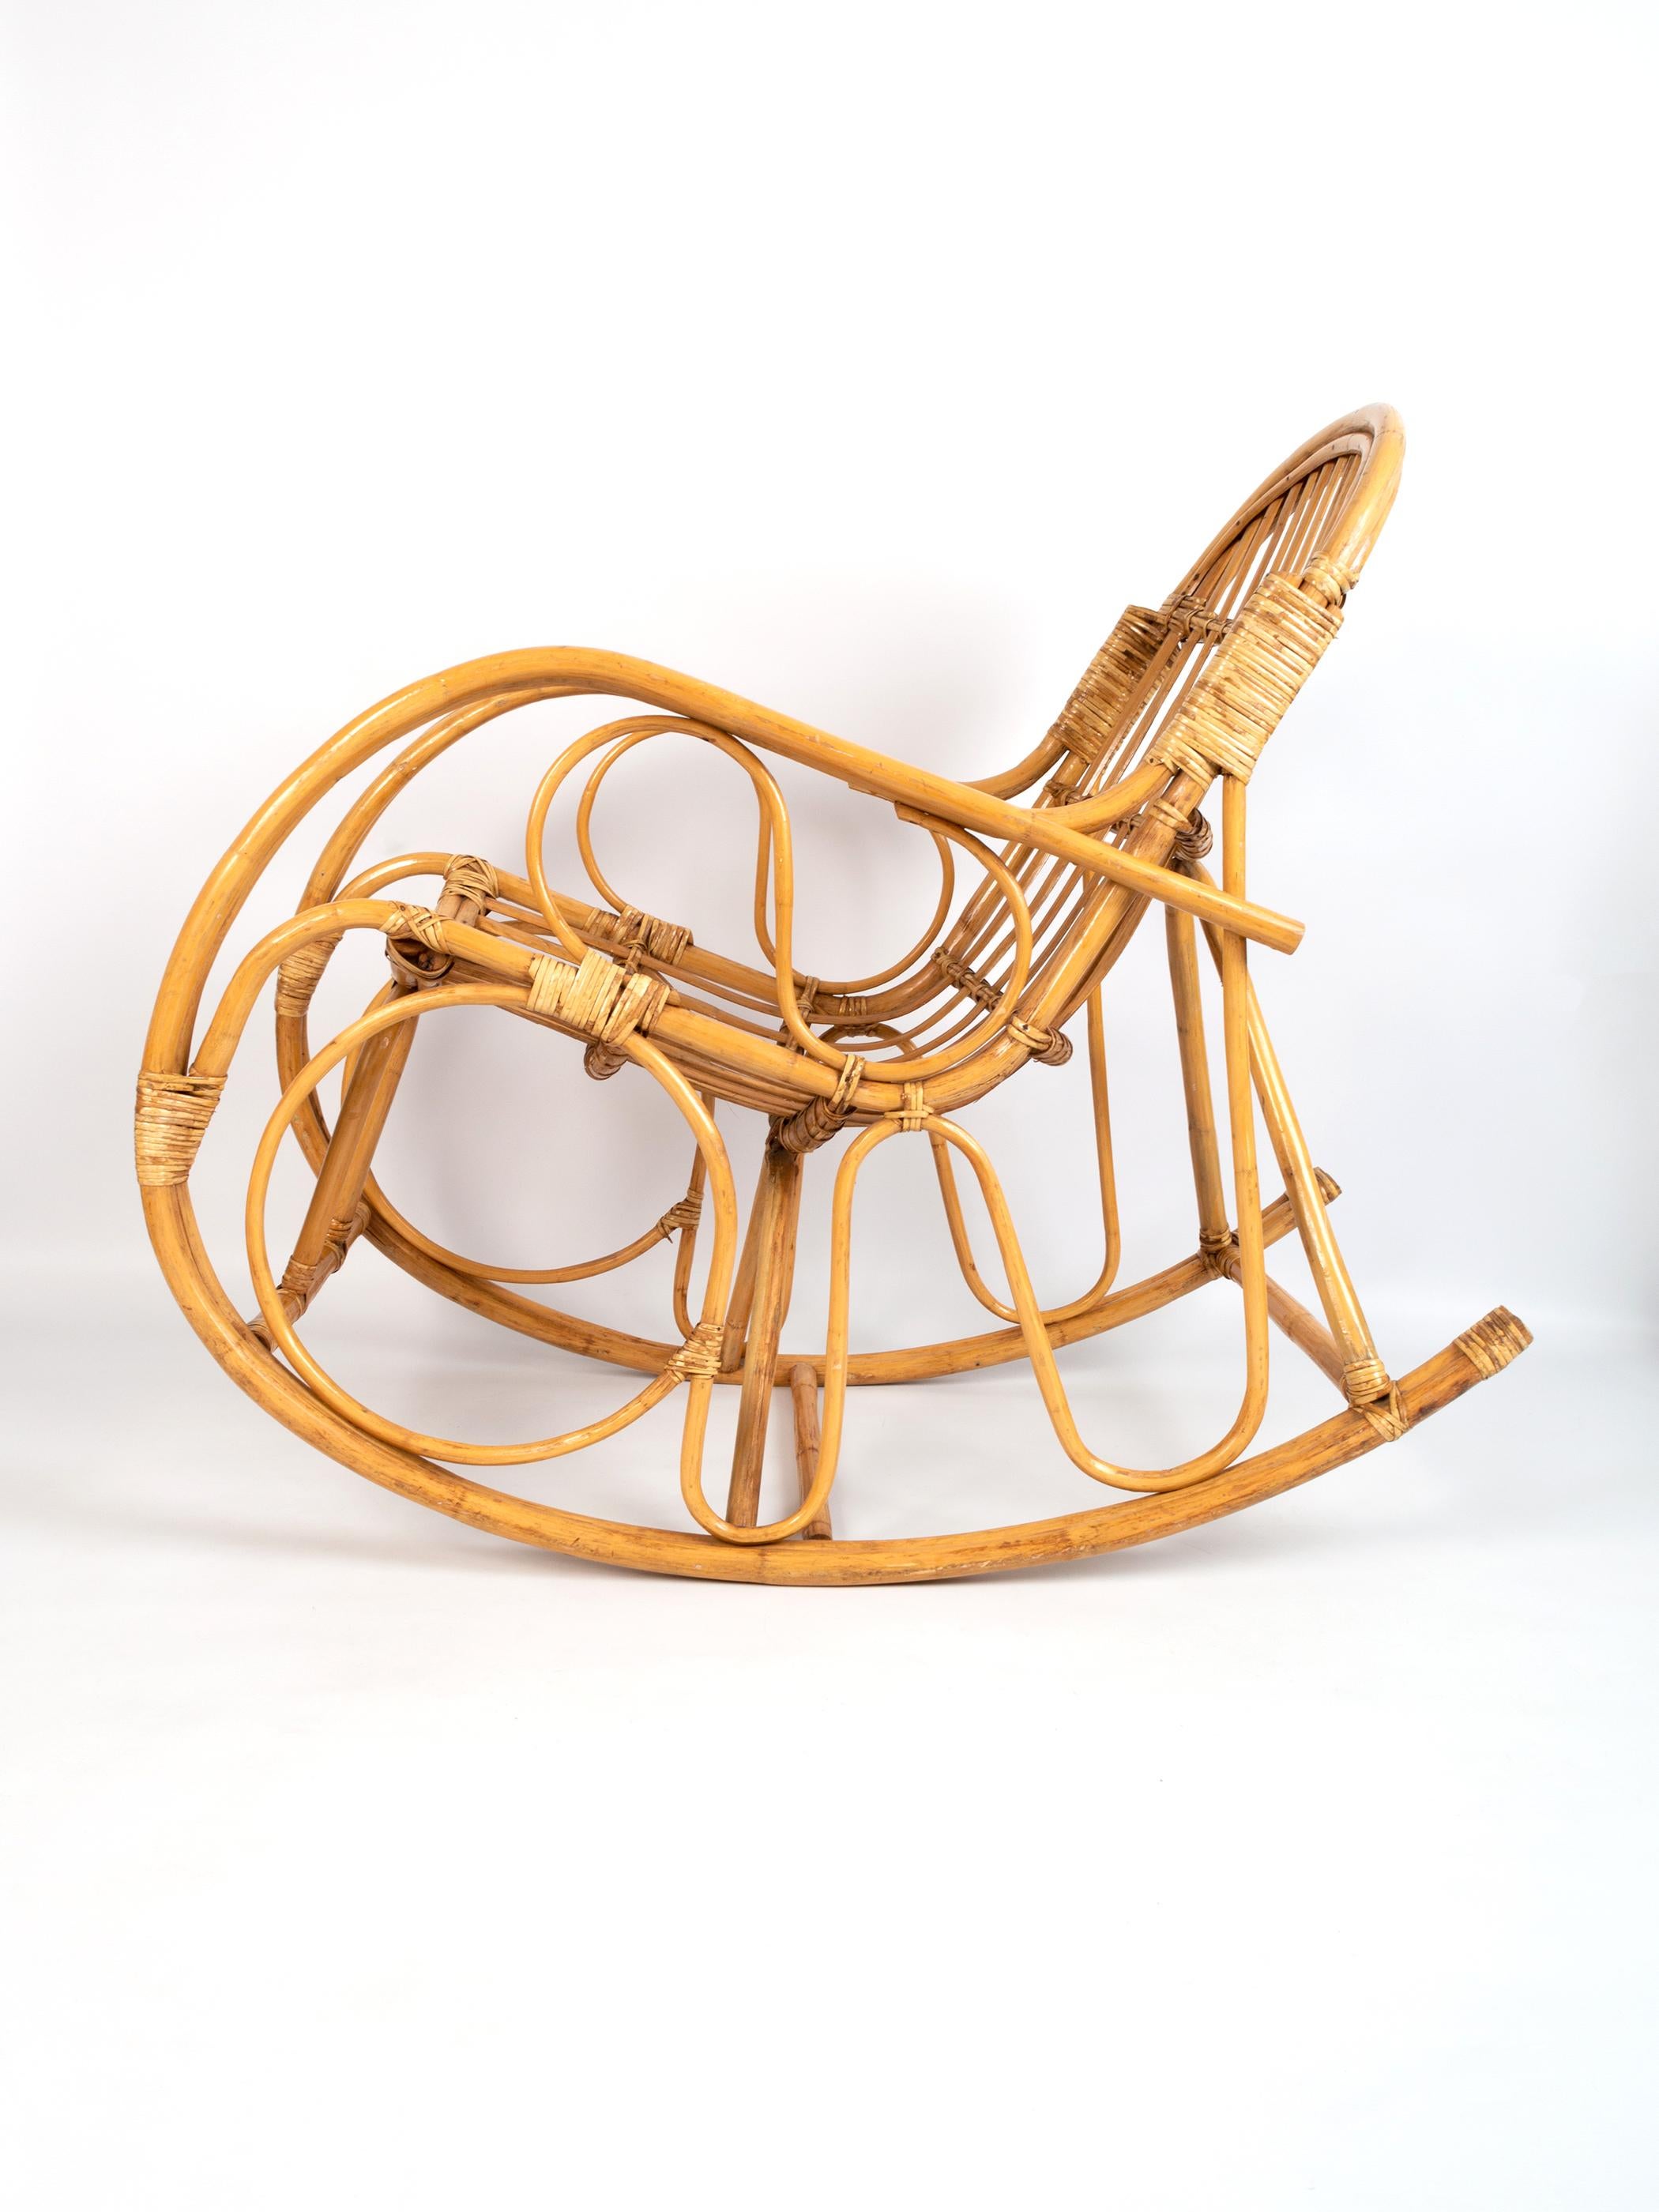 An Italian 1960’s bamboo and rattan rocking lounge chair, In the manner of Franco Albini’s ‘Rocking Chaise’ for Poggi.

Presented in excellent condition commensurate of age. Warm colour and patination to the bamboo.